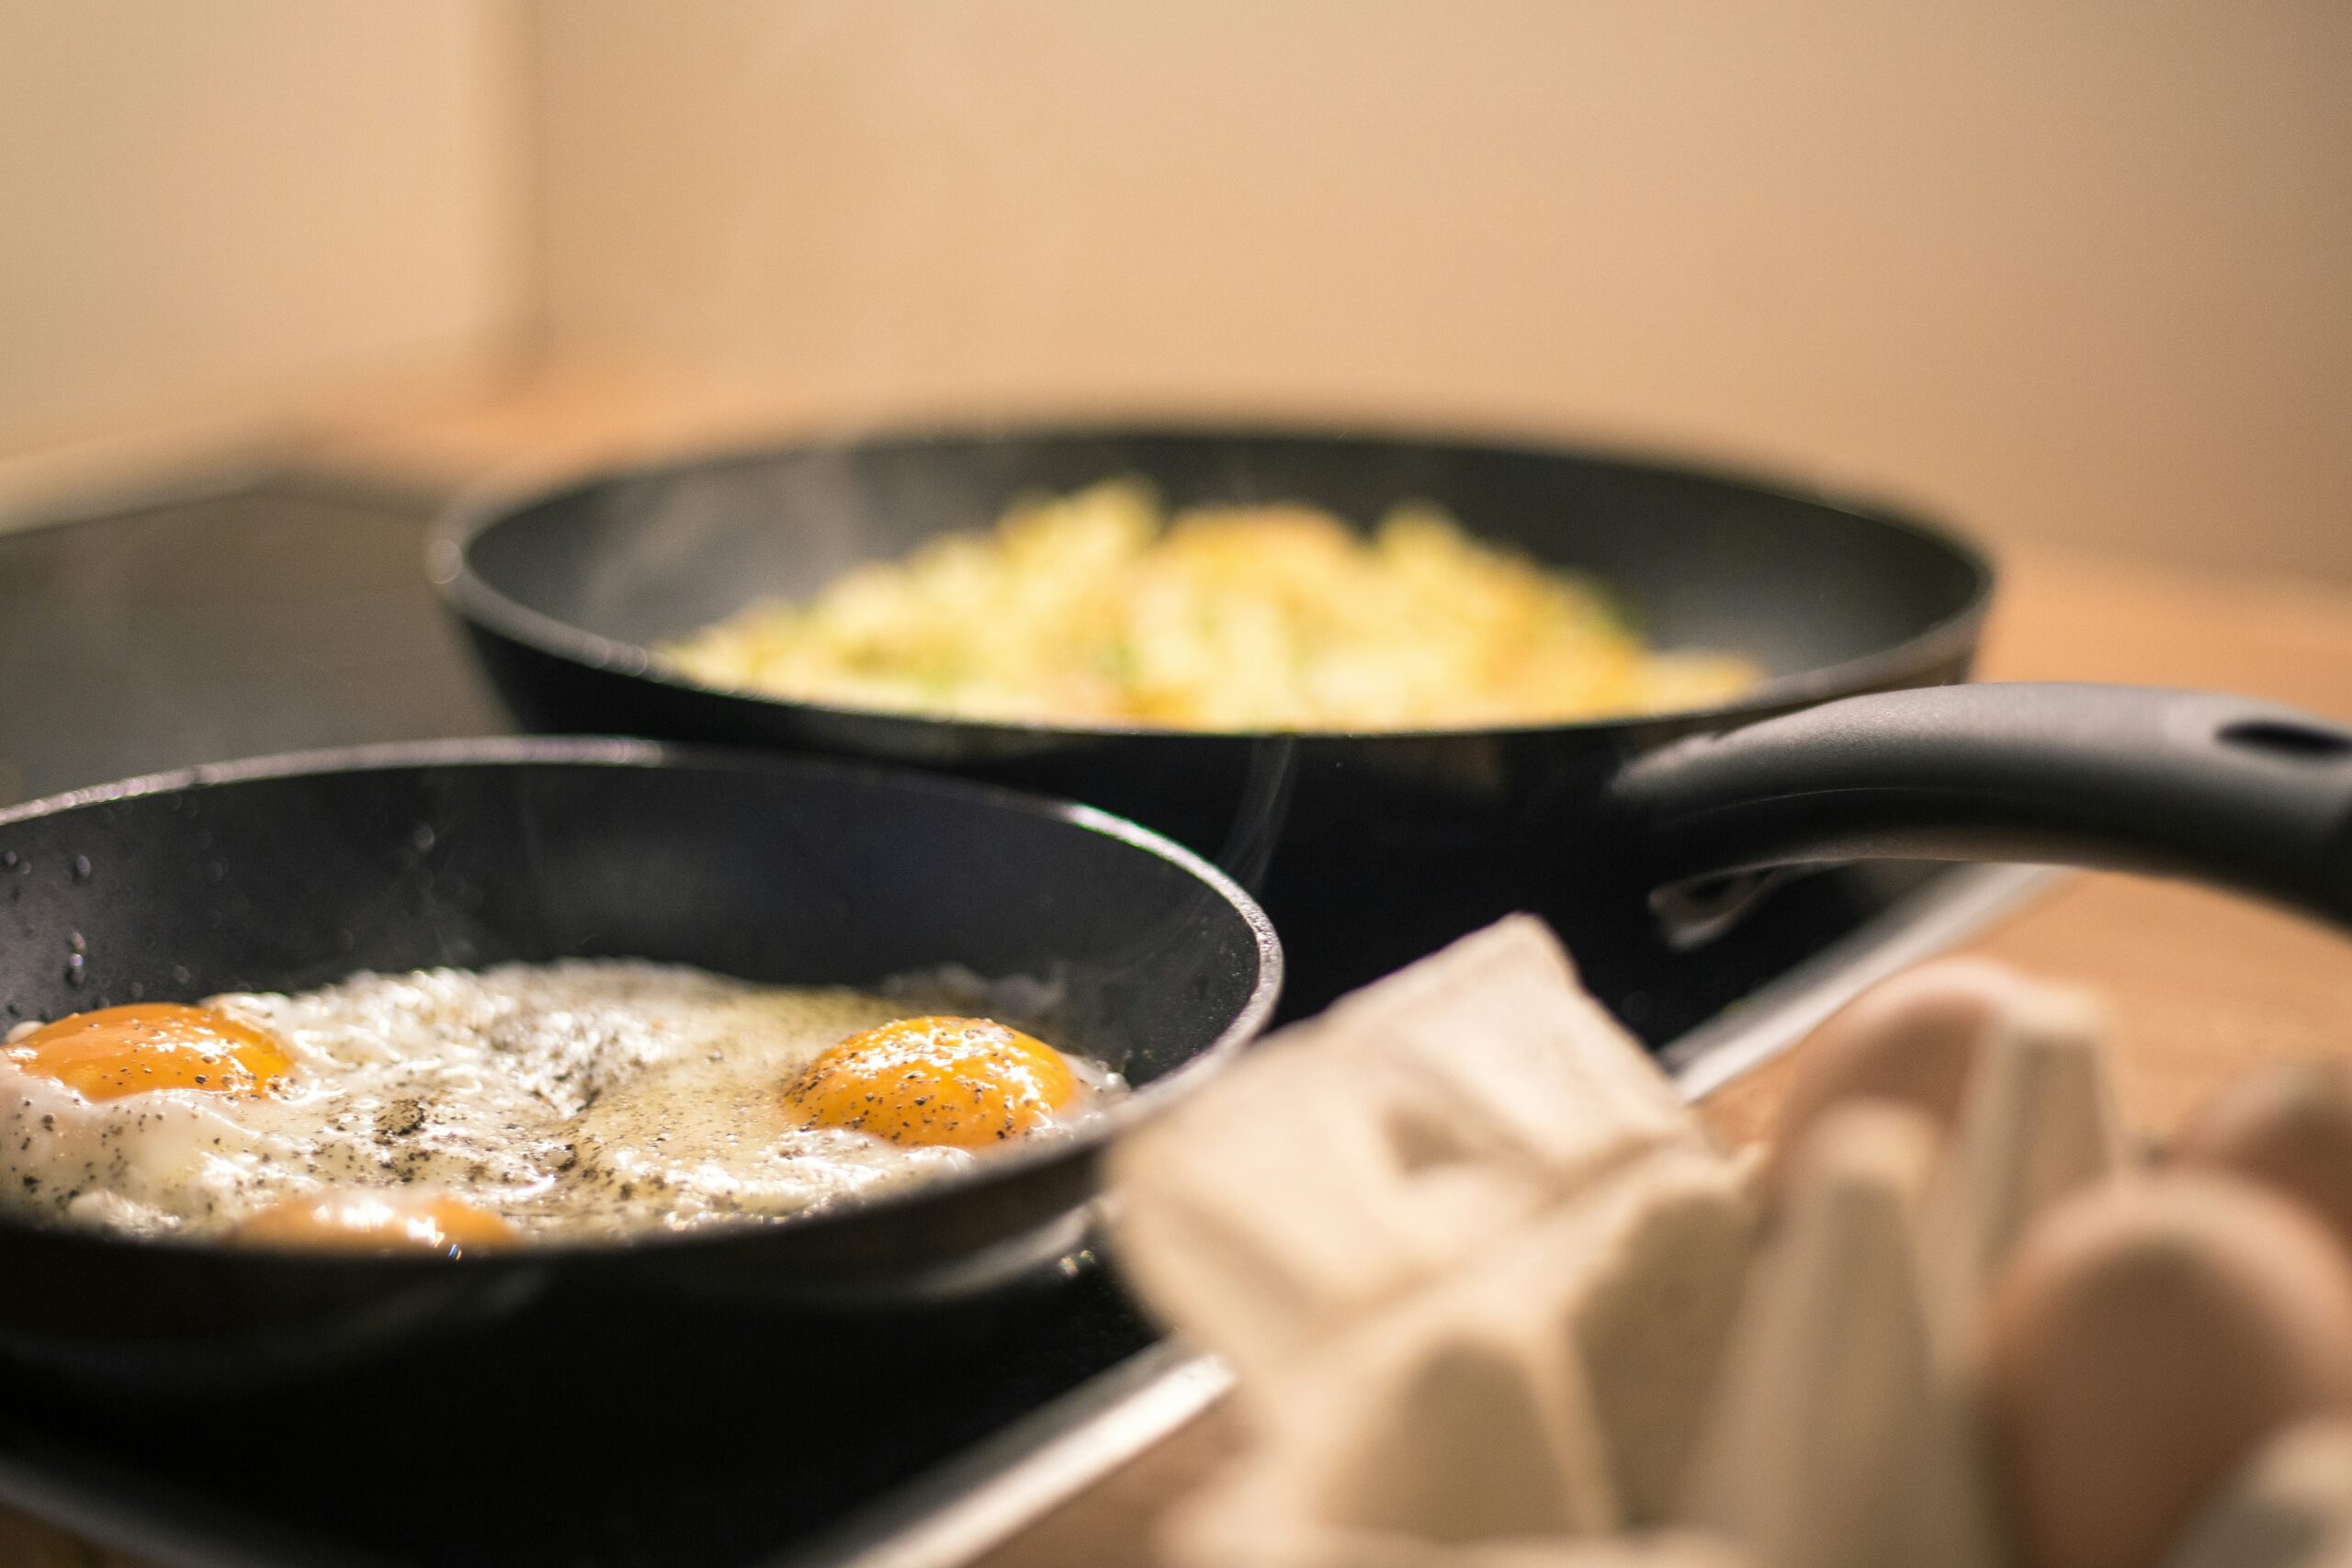 If you're looking for a set of multiple pots, pans and kitchen items, this cookware set is one of the best for gas stove cooking. Pictured: pans on a stove